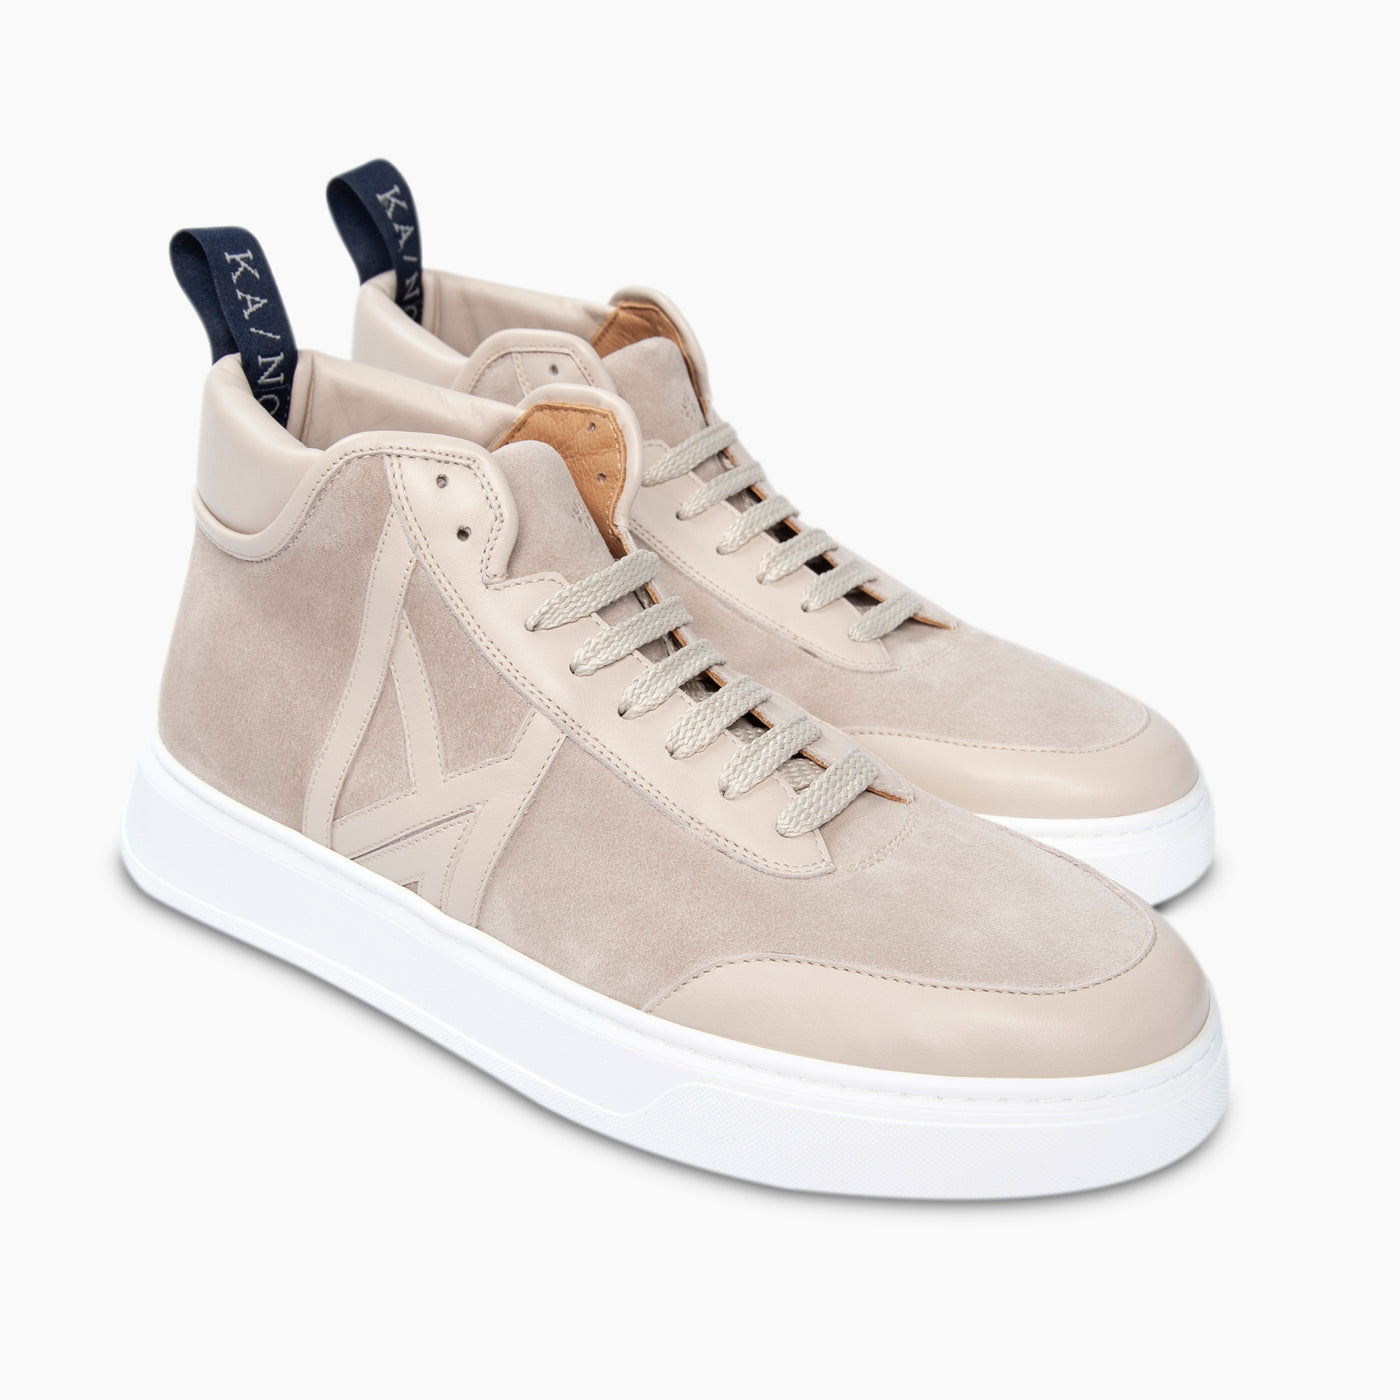 SHARE suede leather mid-sneaker